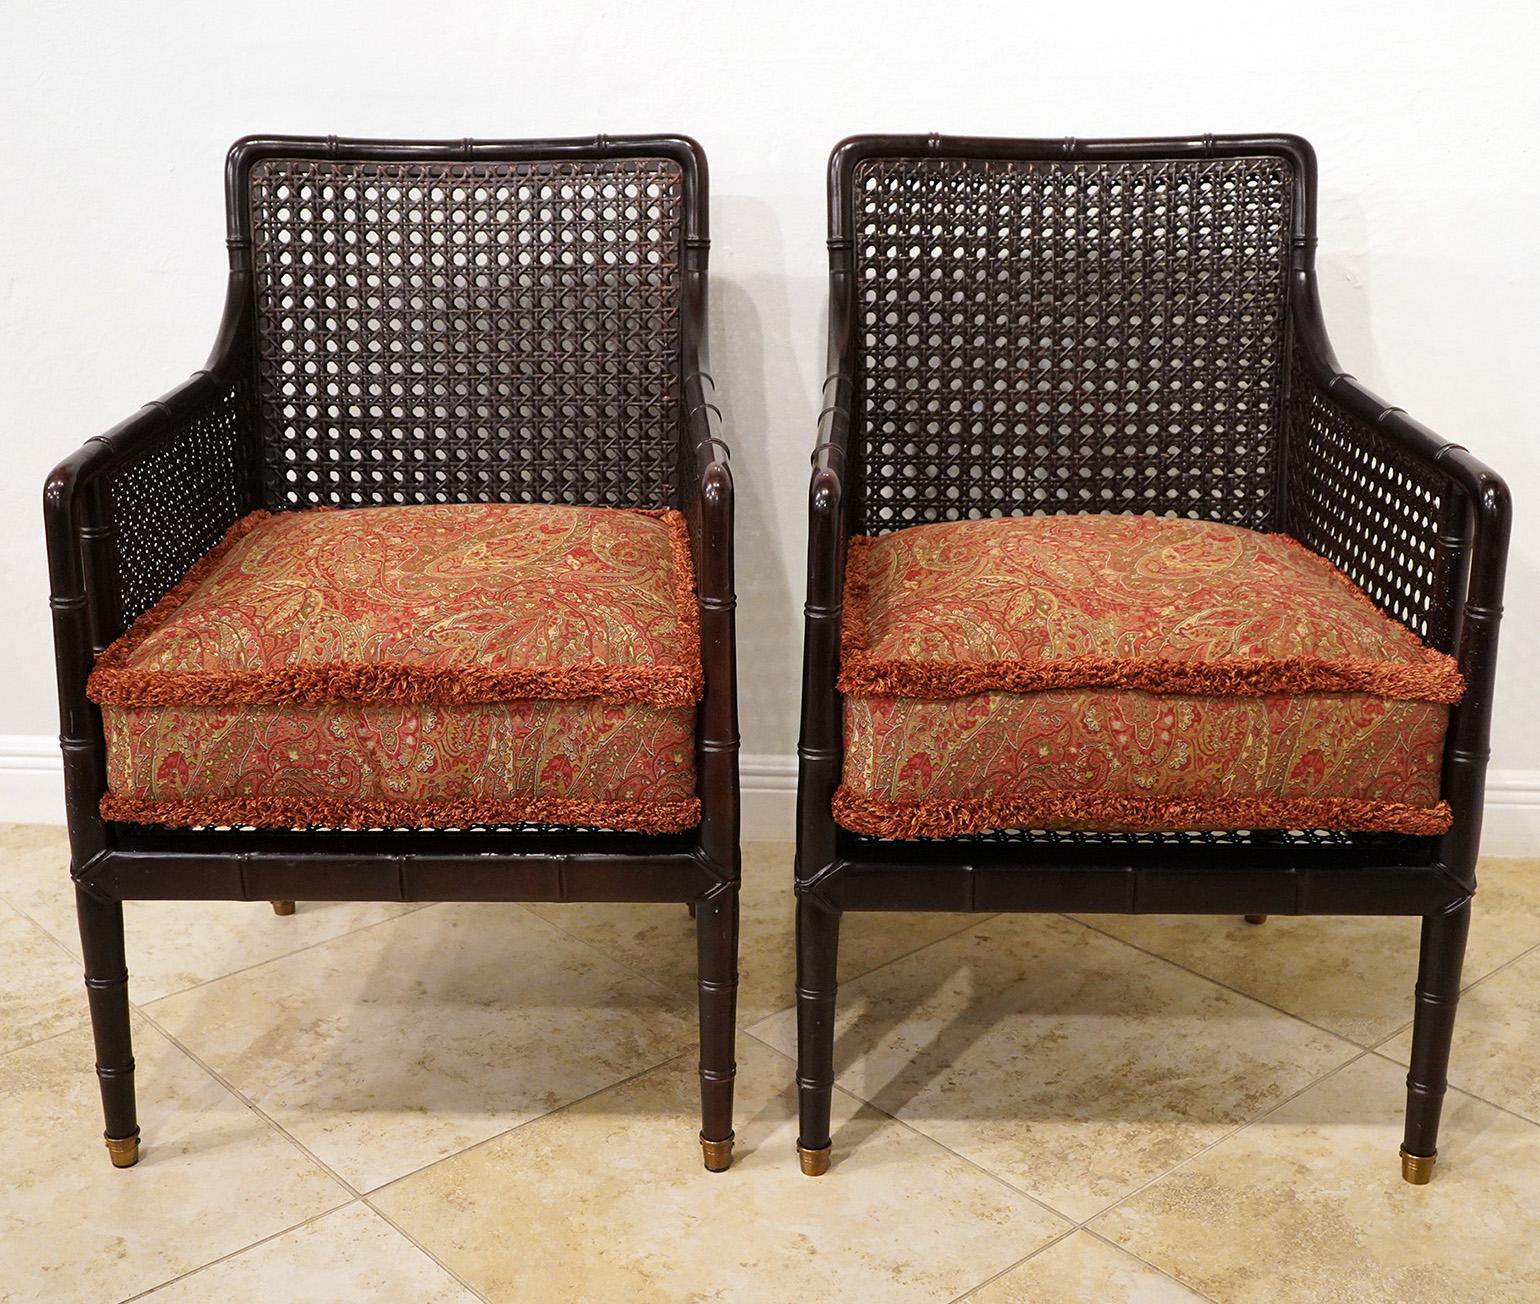 Pair of Baker Lounge chairs. Labeled on the bottom.  Chairs are a campaign style with a faux bamboo look. 38